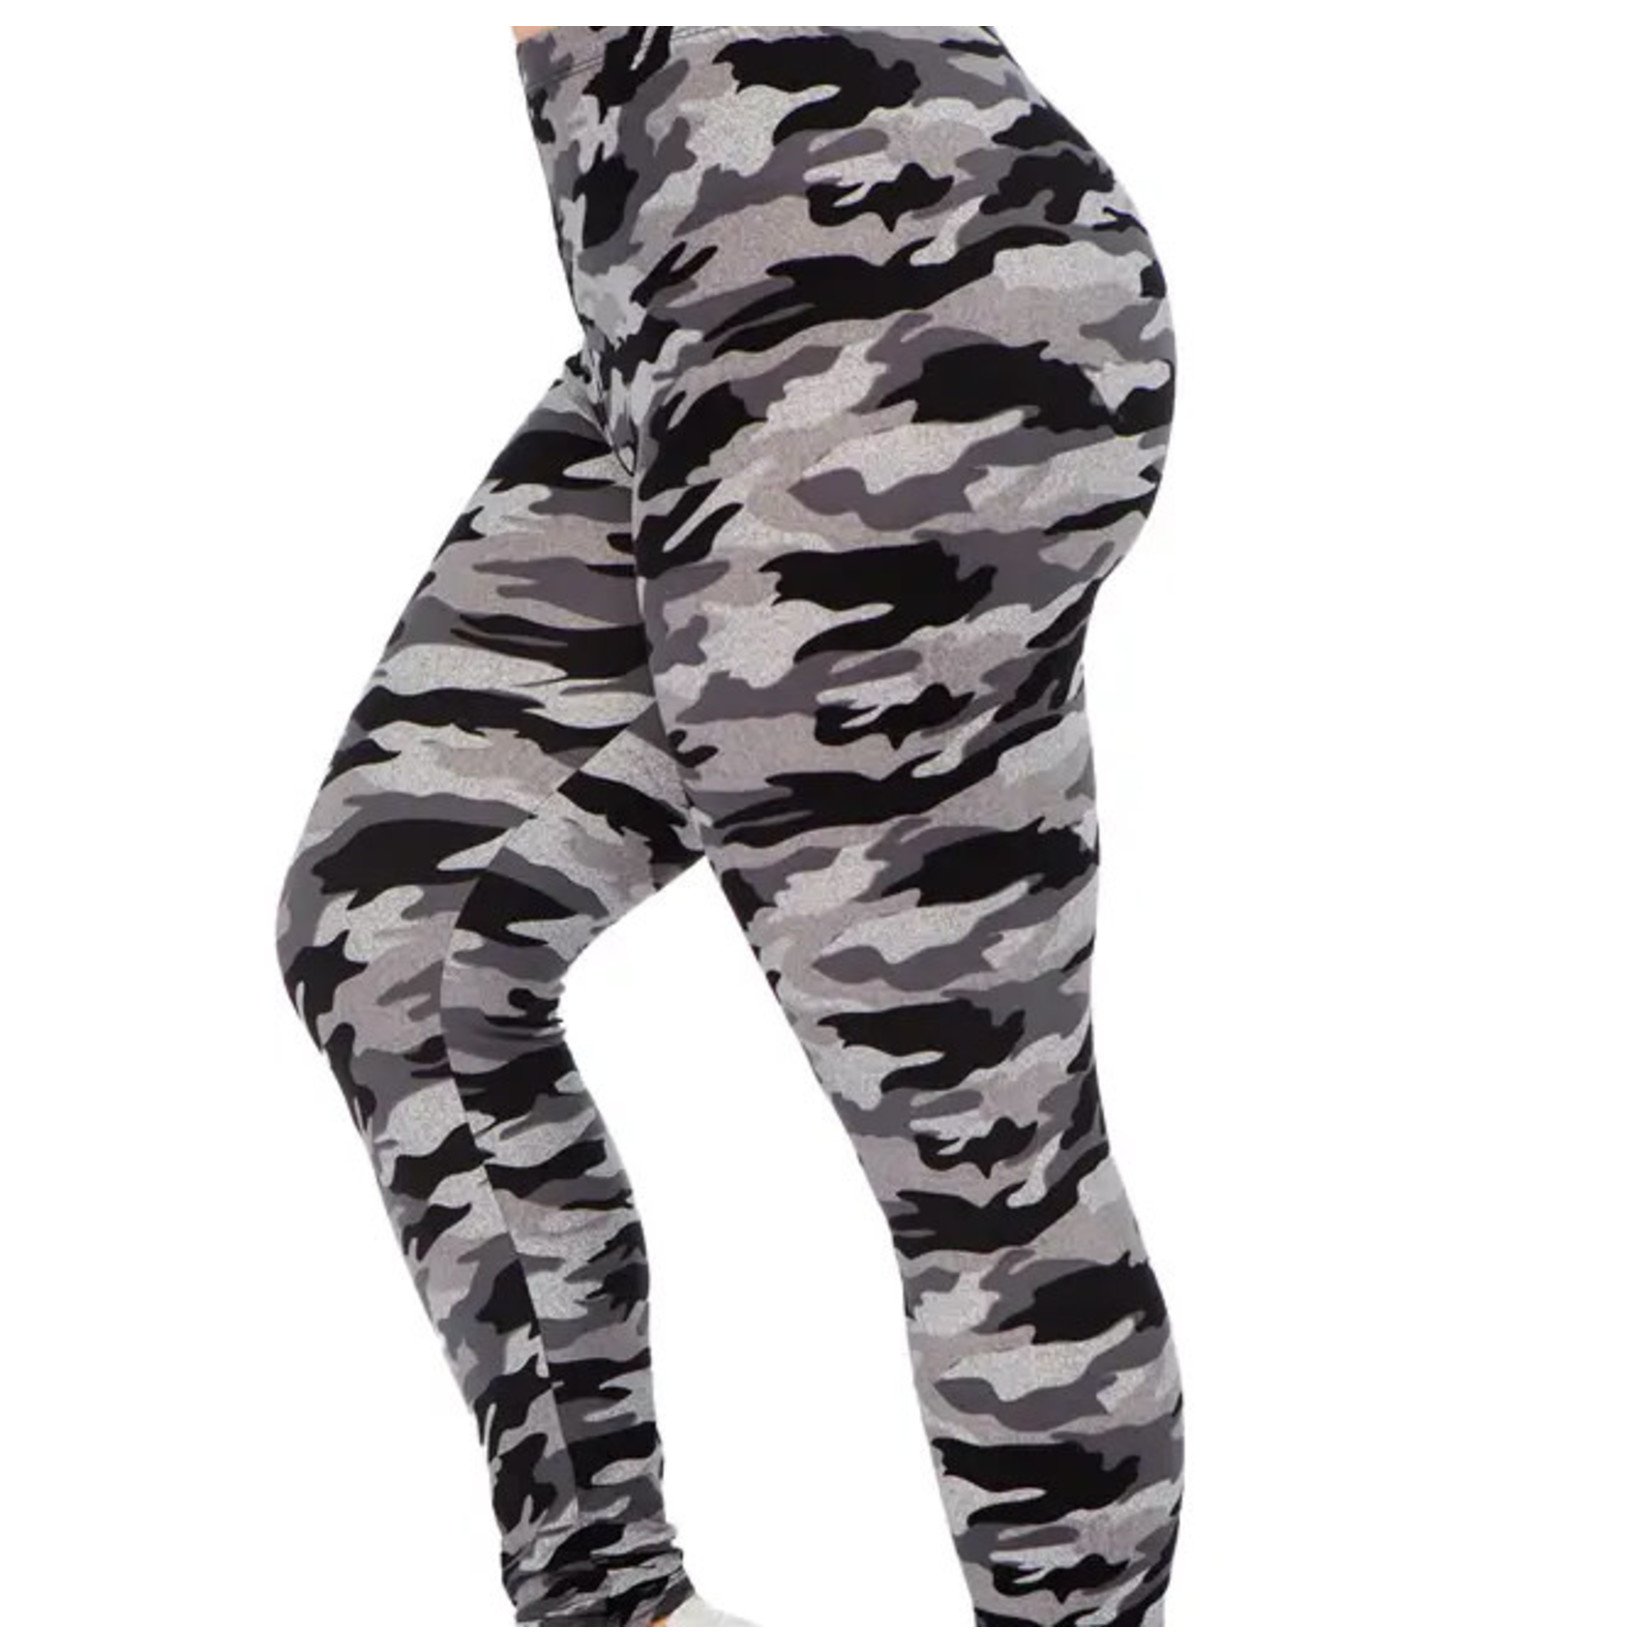 Womens Blue Camo Leggings Printed Army / Military Camouflage Pattern Design  on Workout Yoga Pants Perfect for Crossfit, Running or Surfing -  Canada